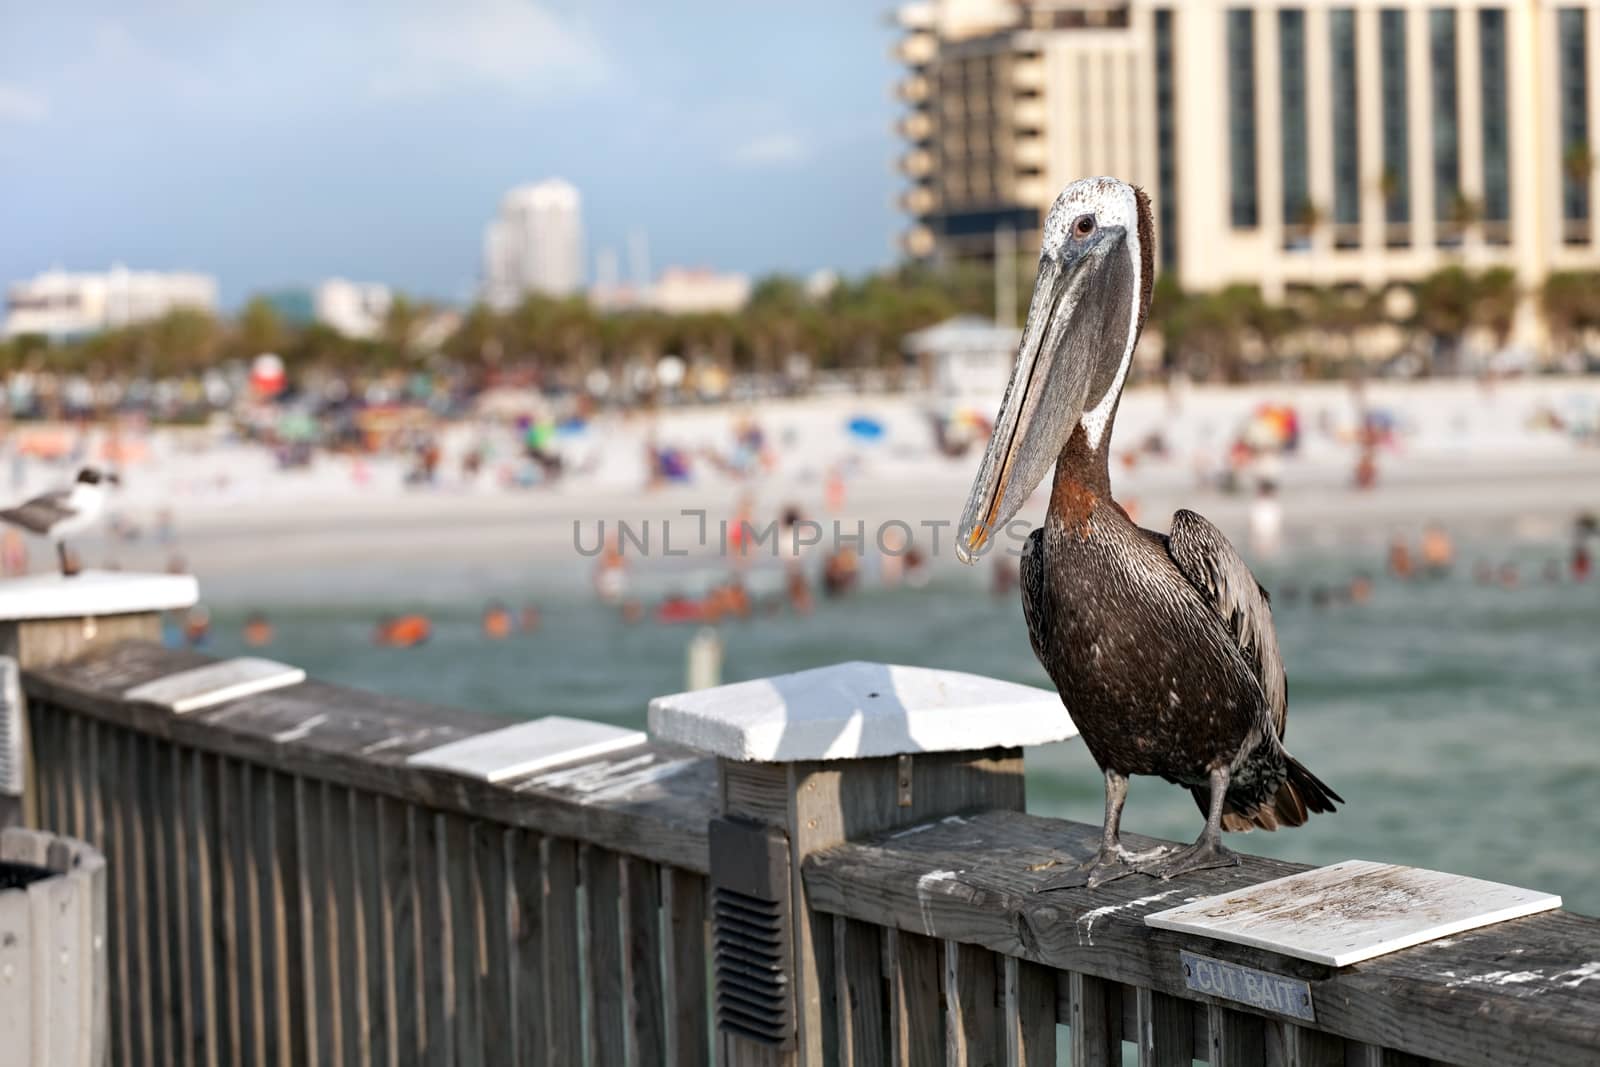 A brown Pelican bird posing on the railing of the public pier in Clearwater Florida.